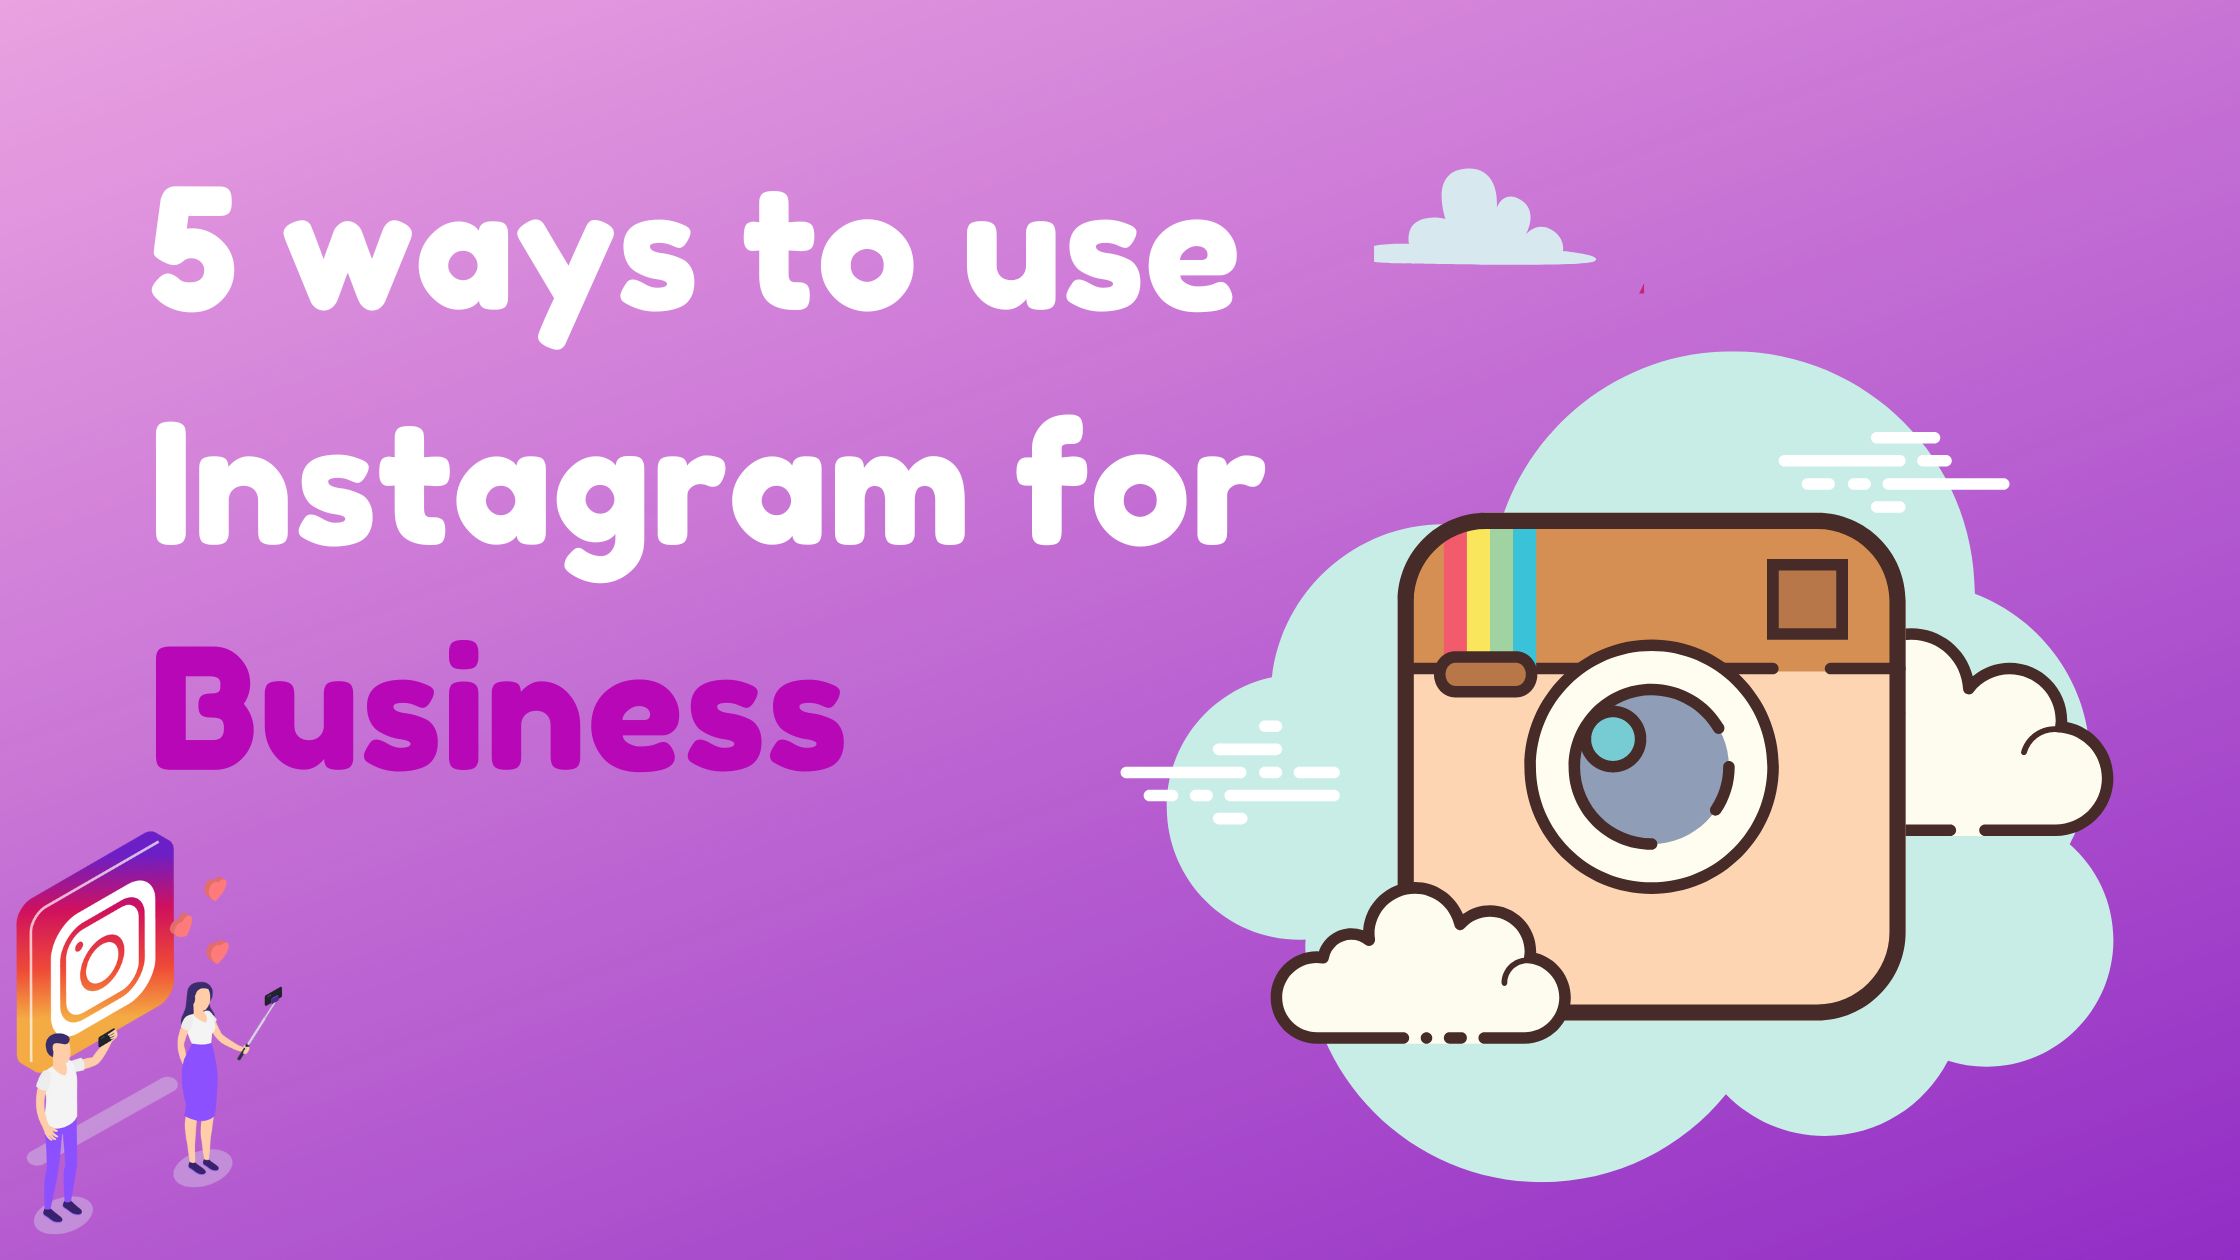 5 Ways to Use Instagram for Business